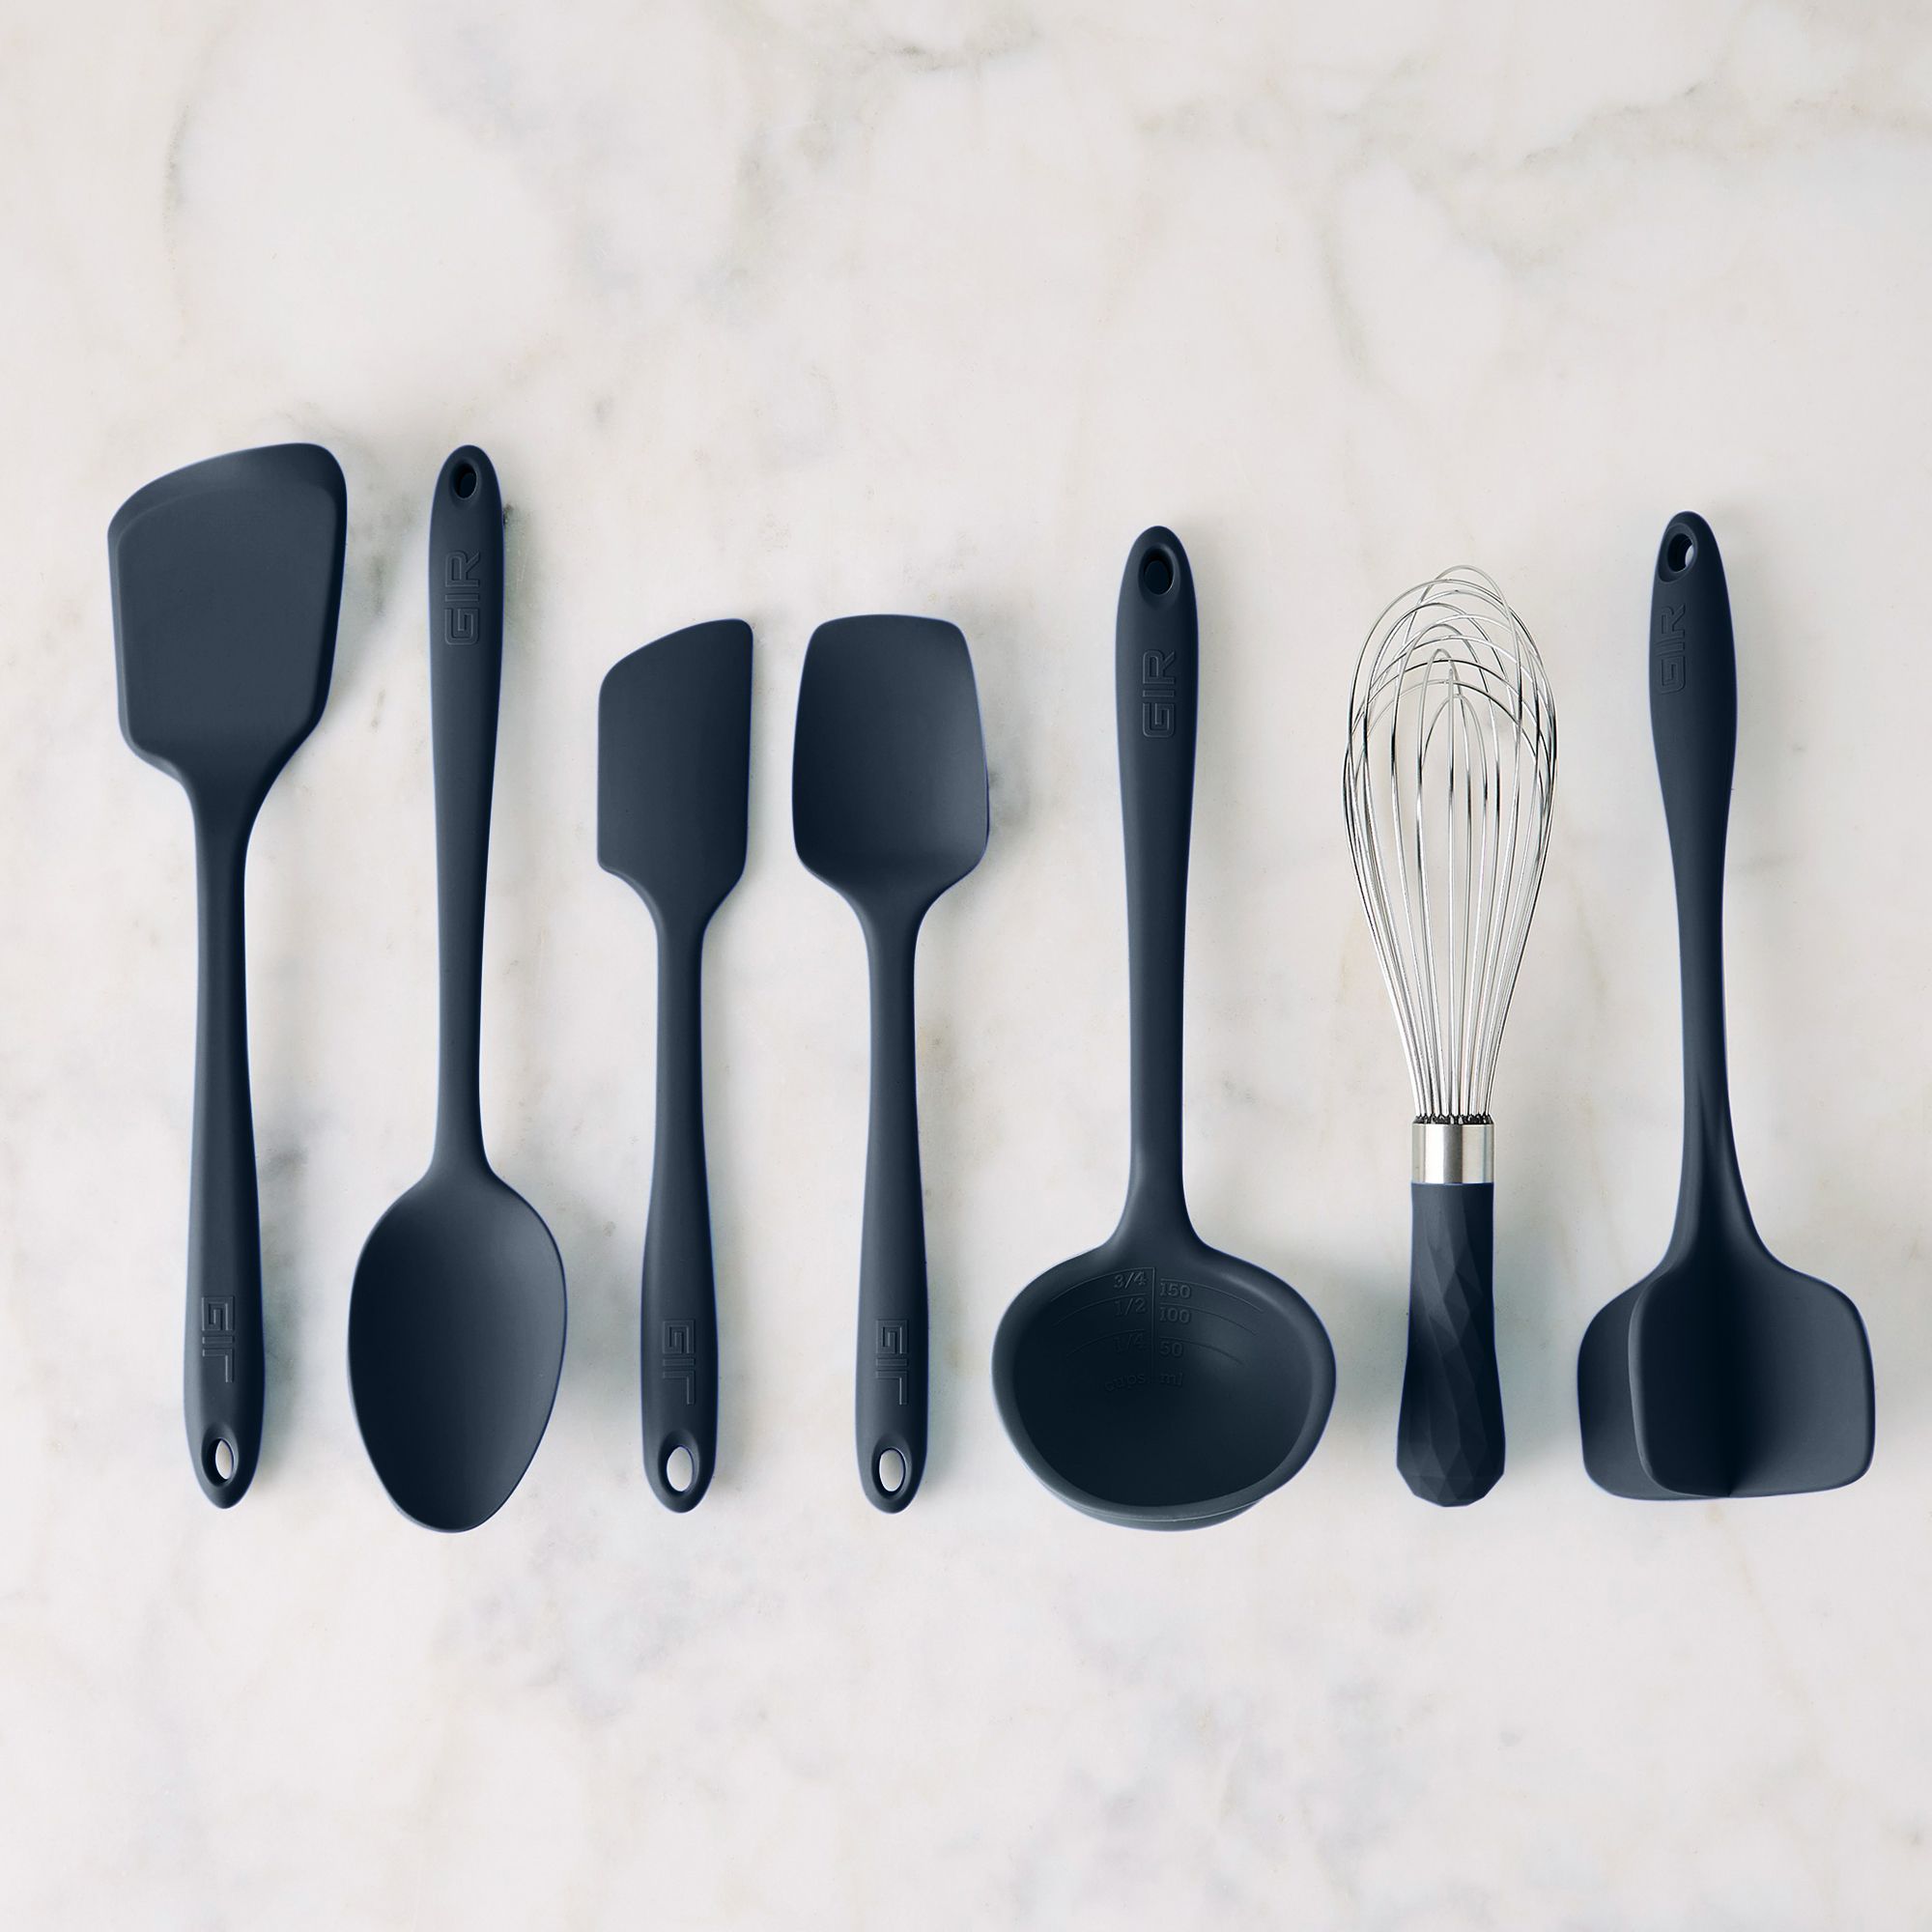 Gir 7-Piece Ultimate Silicone Kitchen Tool Set - Black